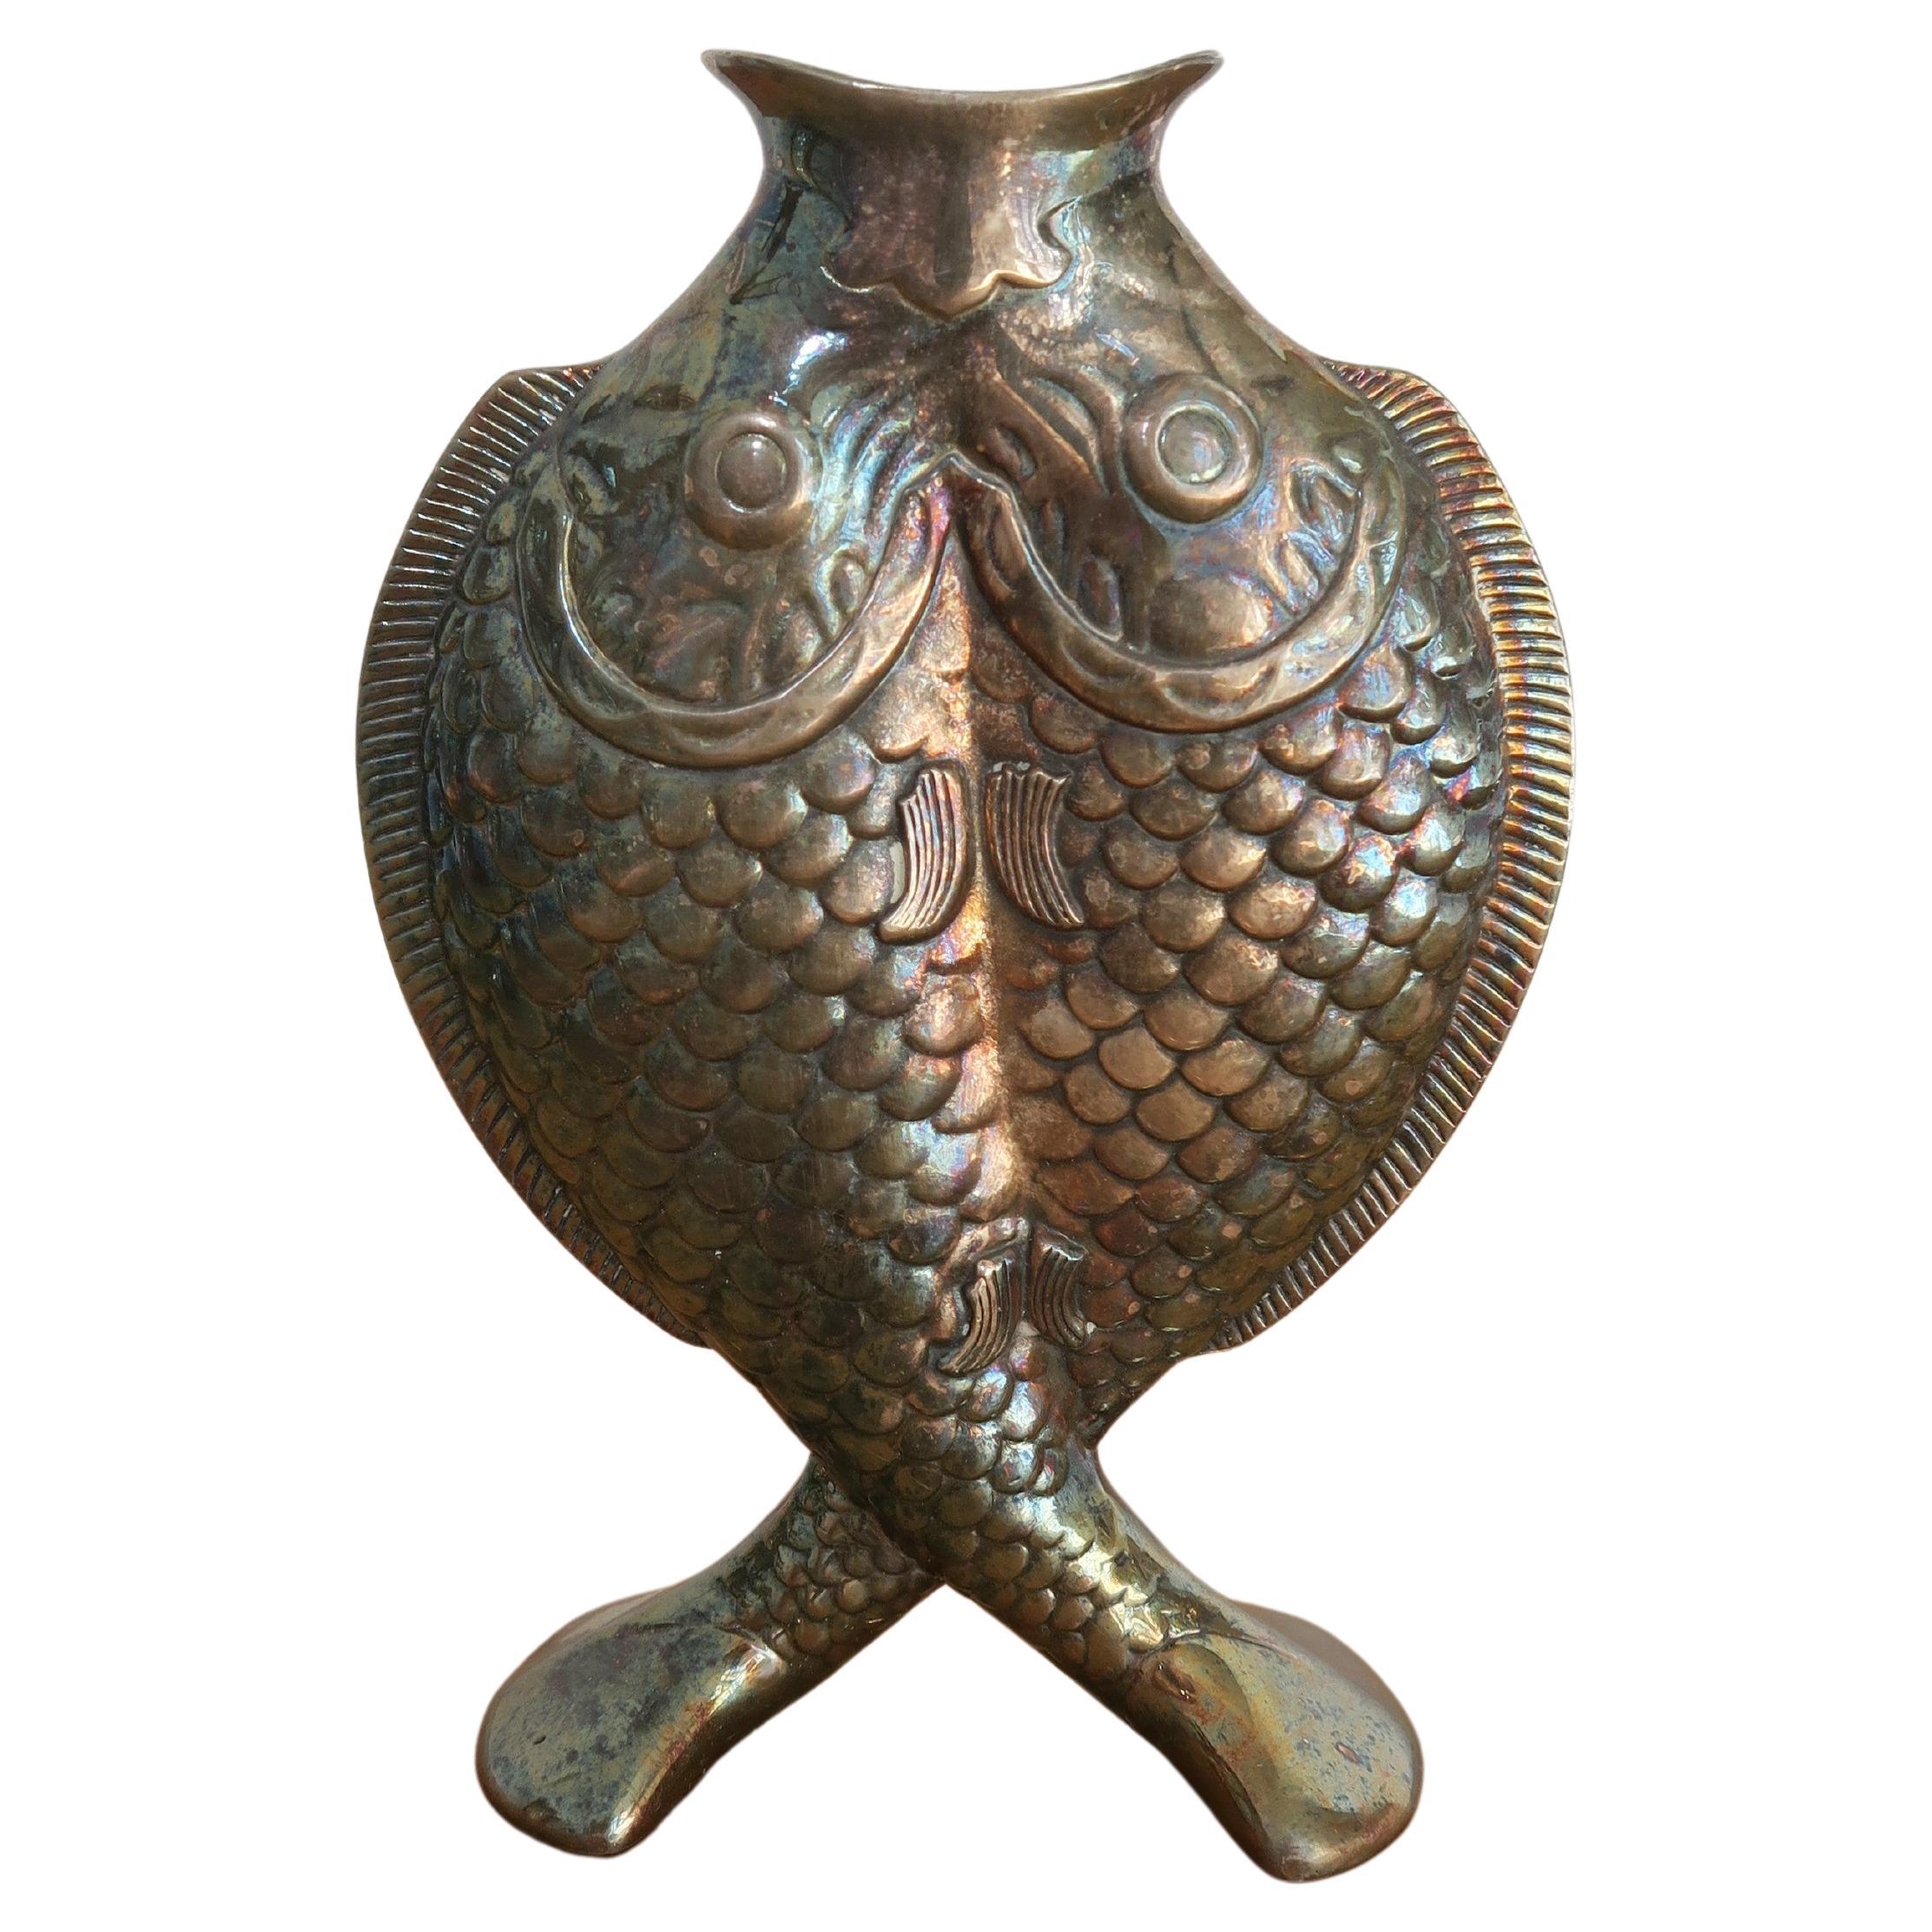 Twin Fish 'Pisces' Silver Vase by French Manufacturer Christofle